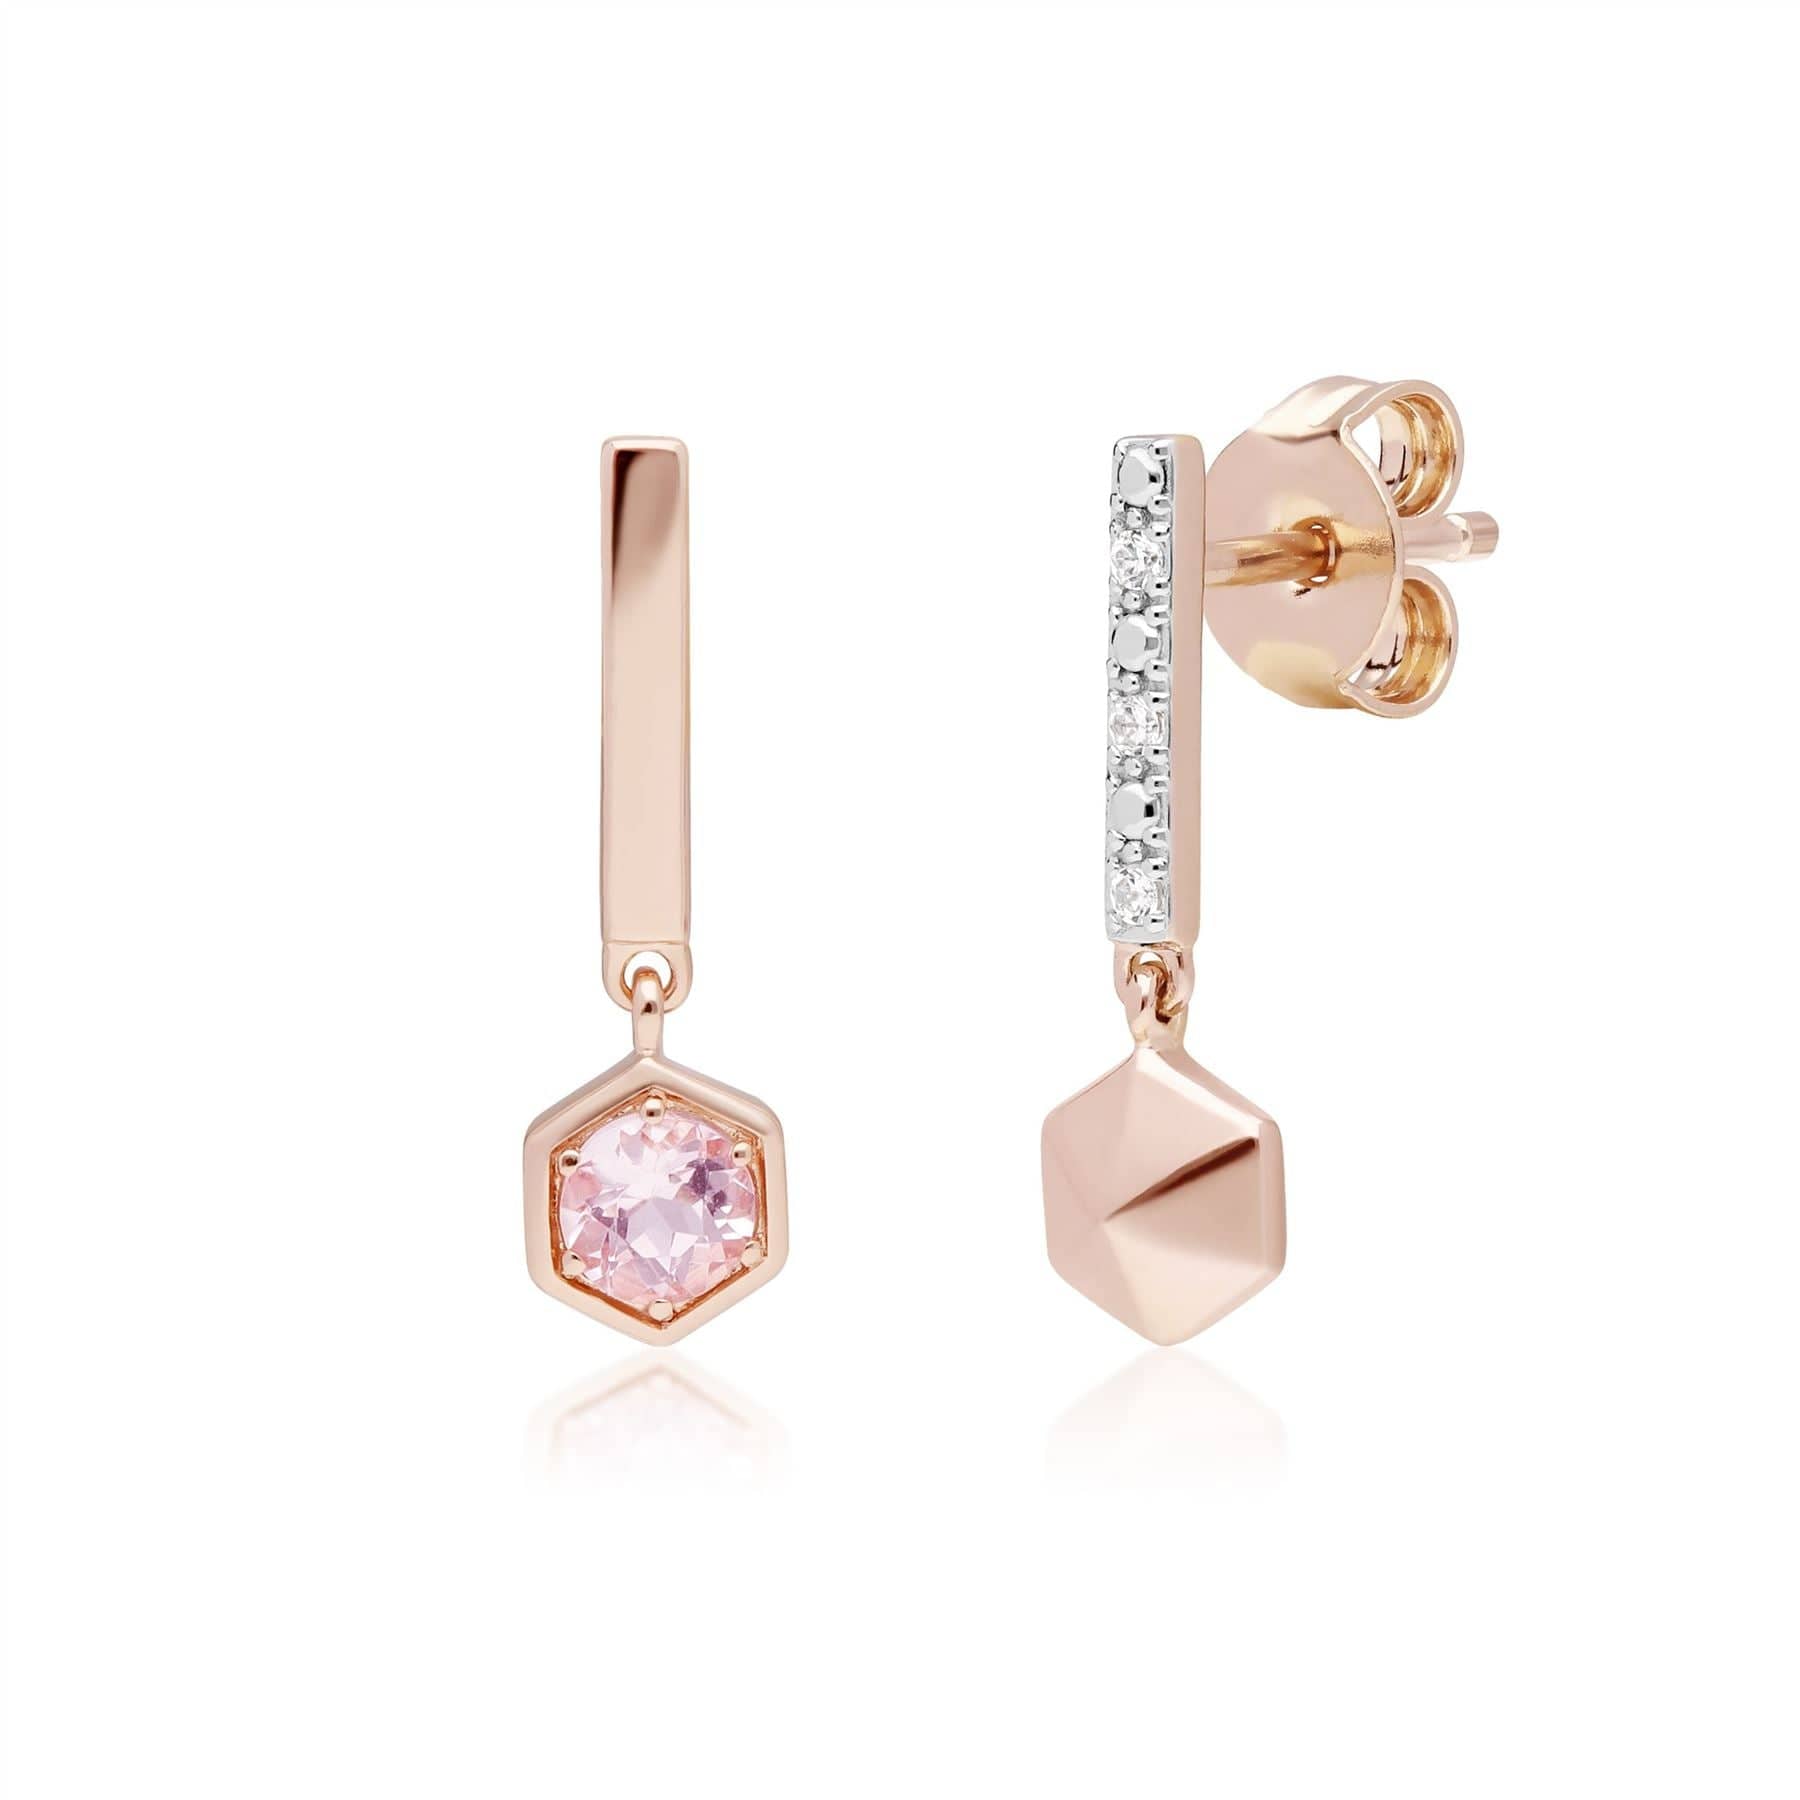 135E1637019 Micro Statement Mismatched Morganite & Diamond Drop Earrings in 9ct Rose Gold 4